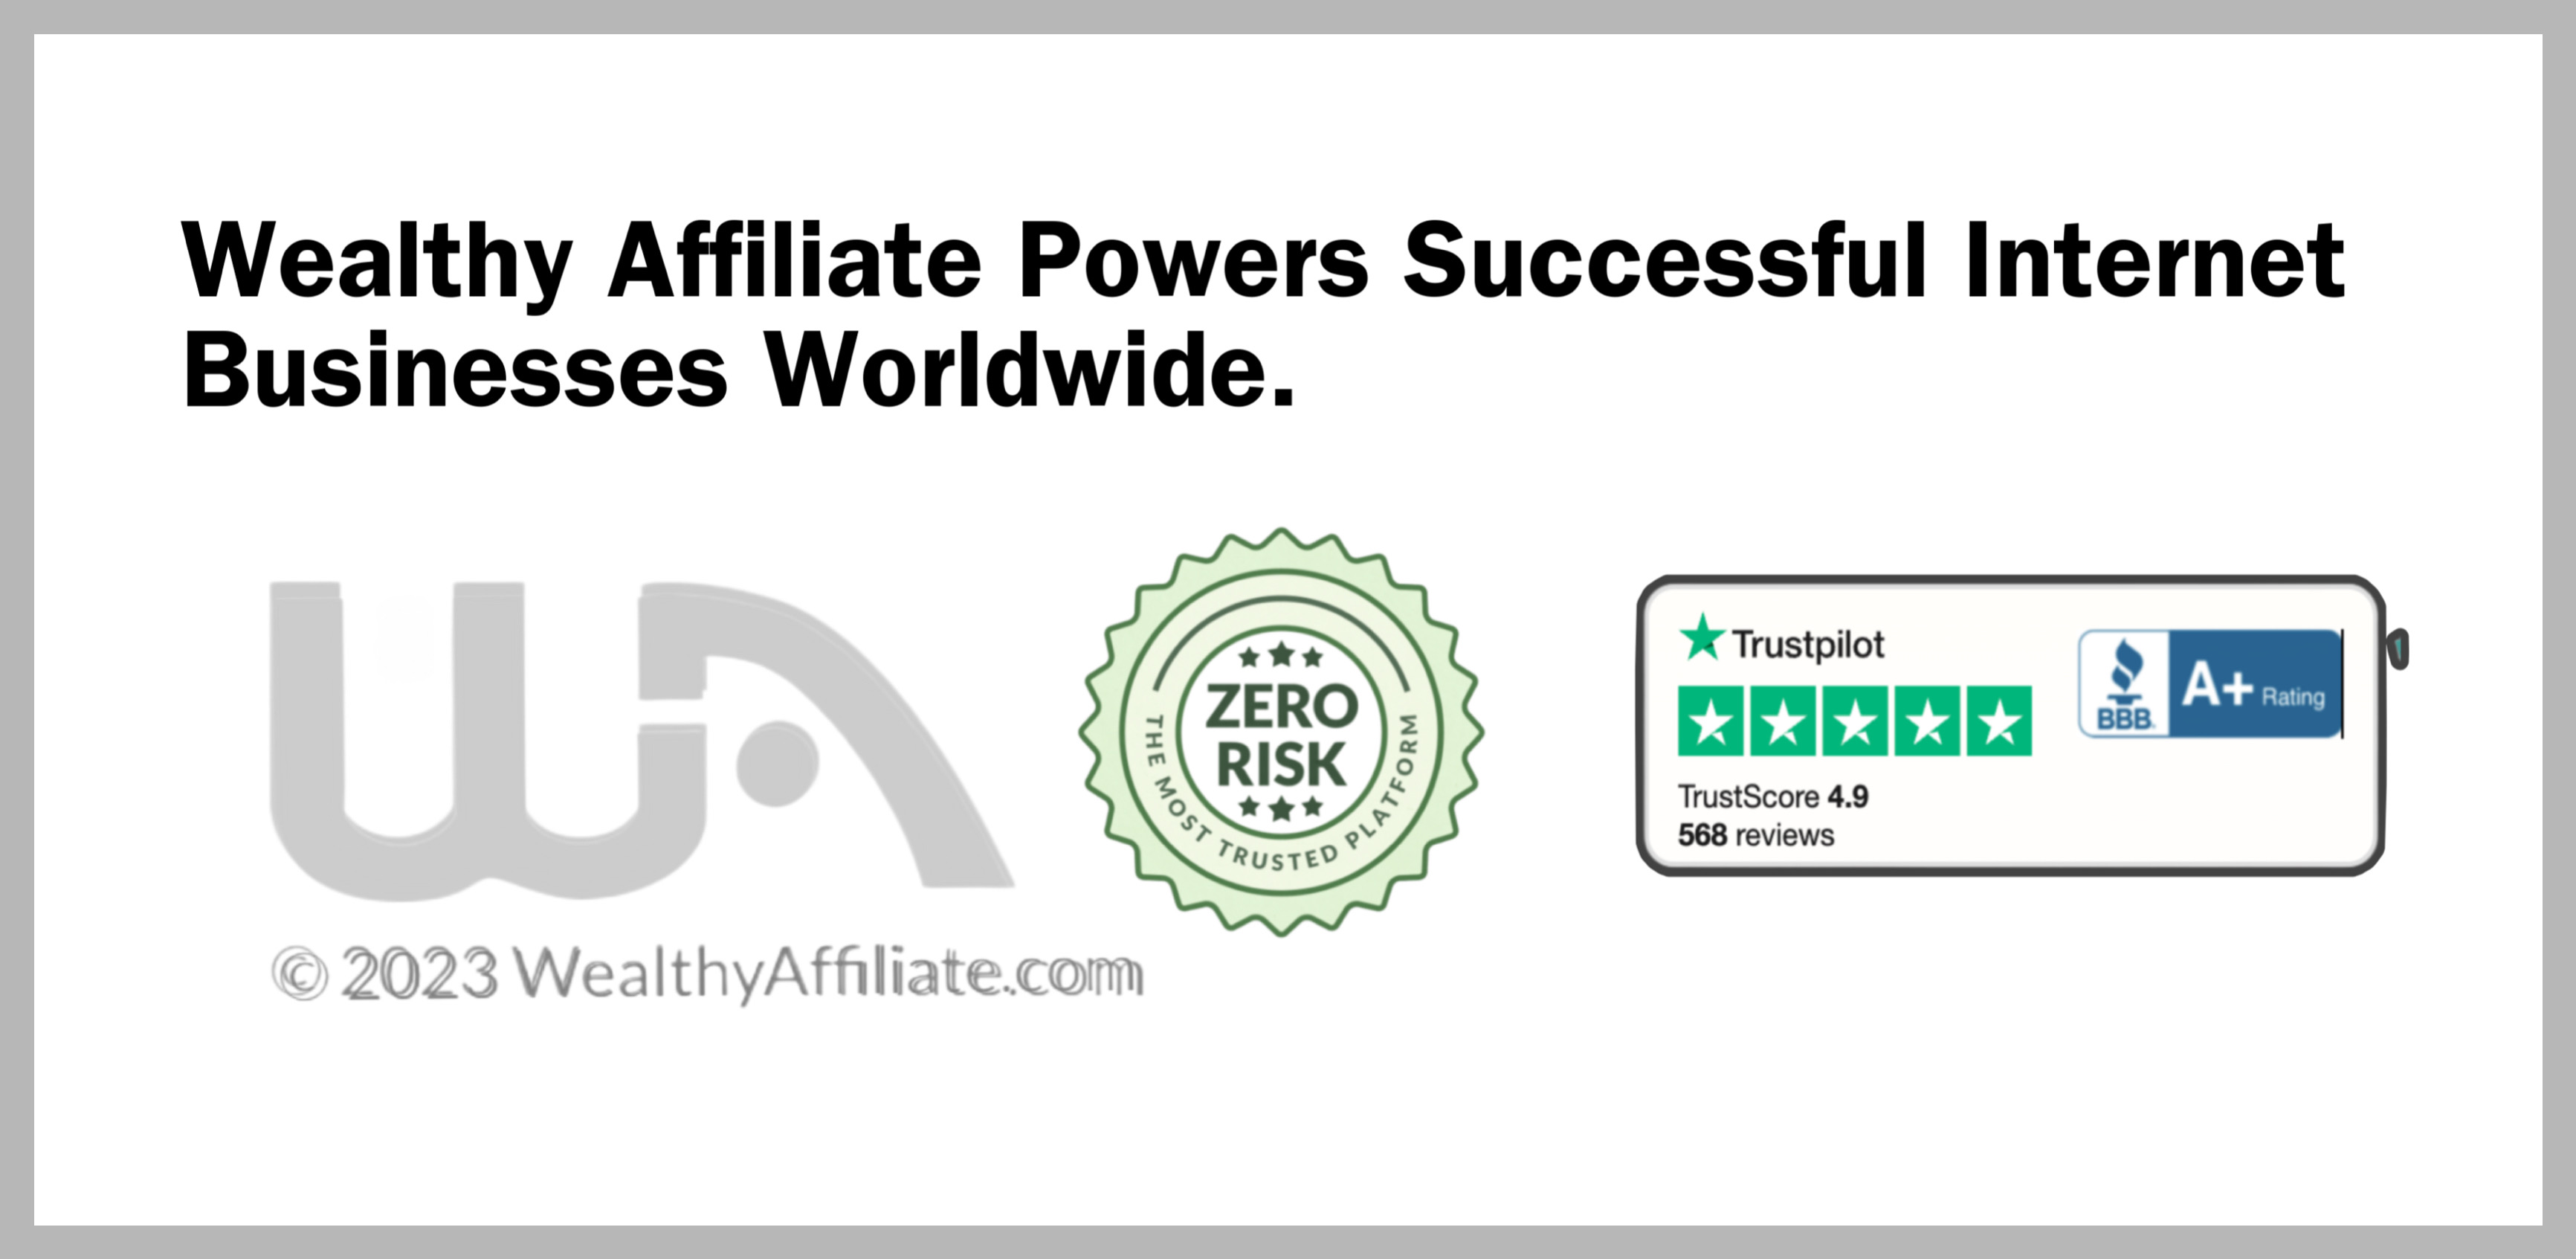 Wealthy Affiliate Powers Successful Internet Businesses Worldwide.